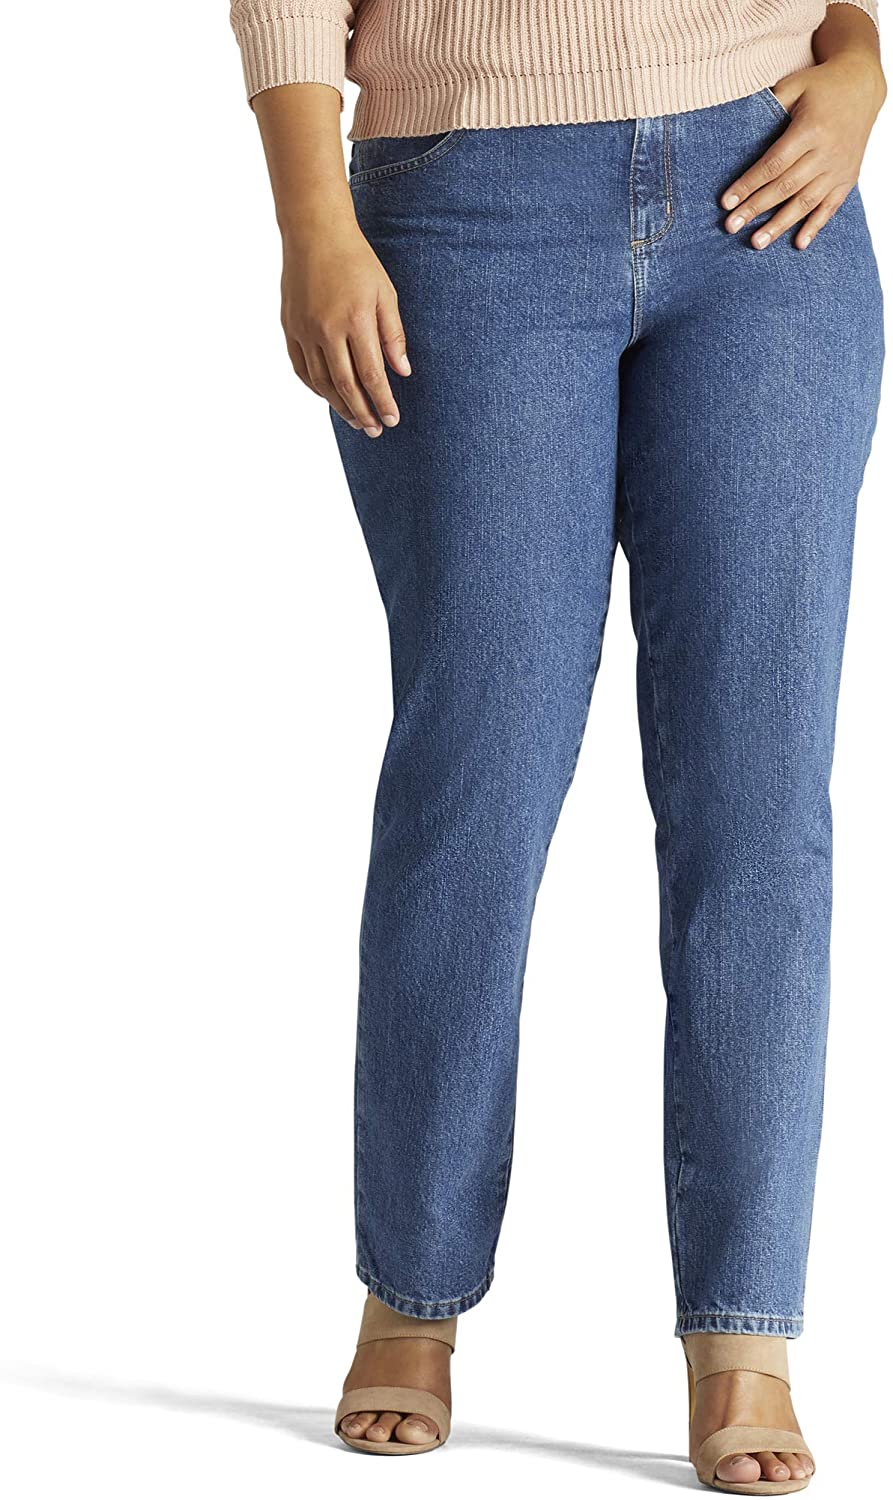 Details about   LEE Women's Plus-Size Relaxed Fit All Cotton Straight Leg Jean 